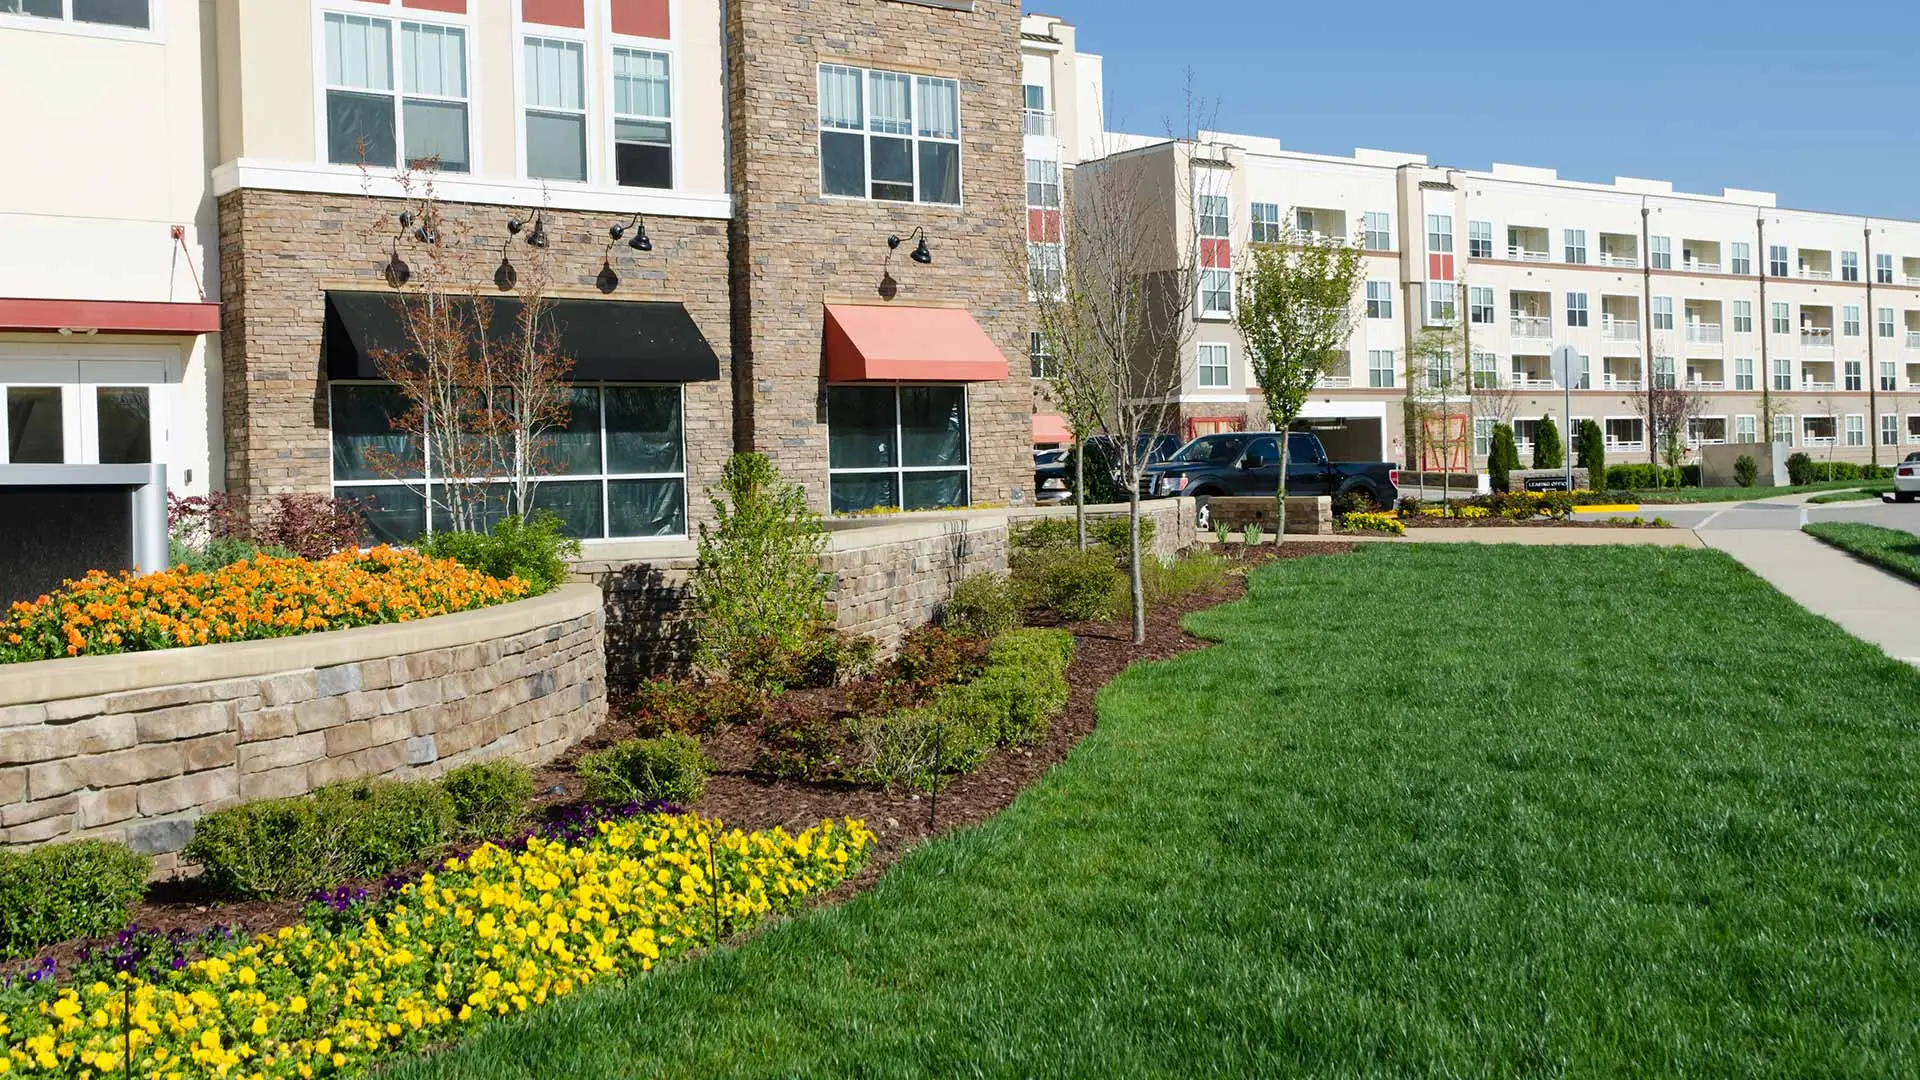 Commercial lawn care and landscaping in Macomb, MI.